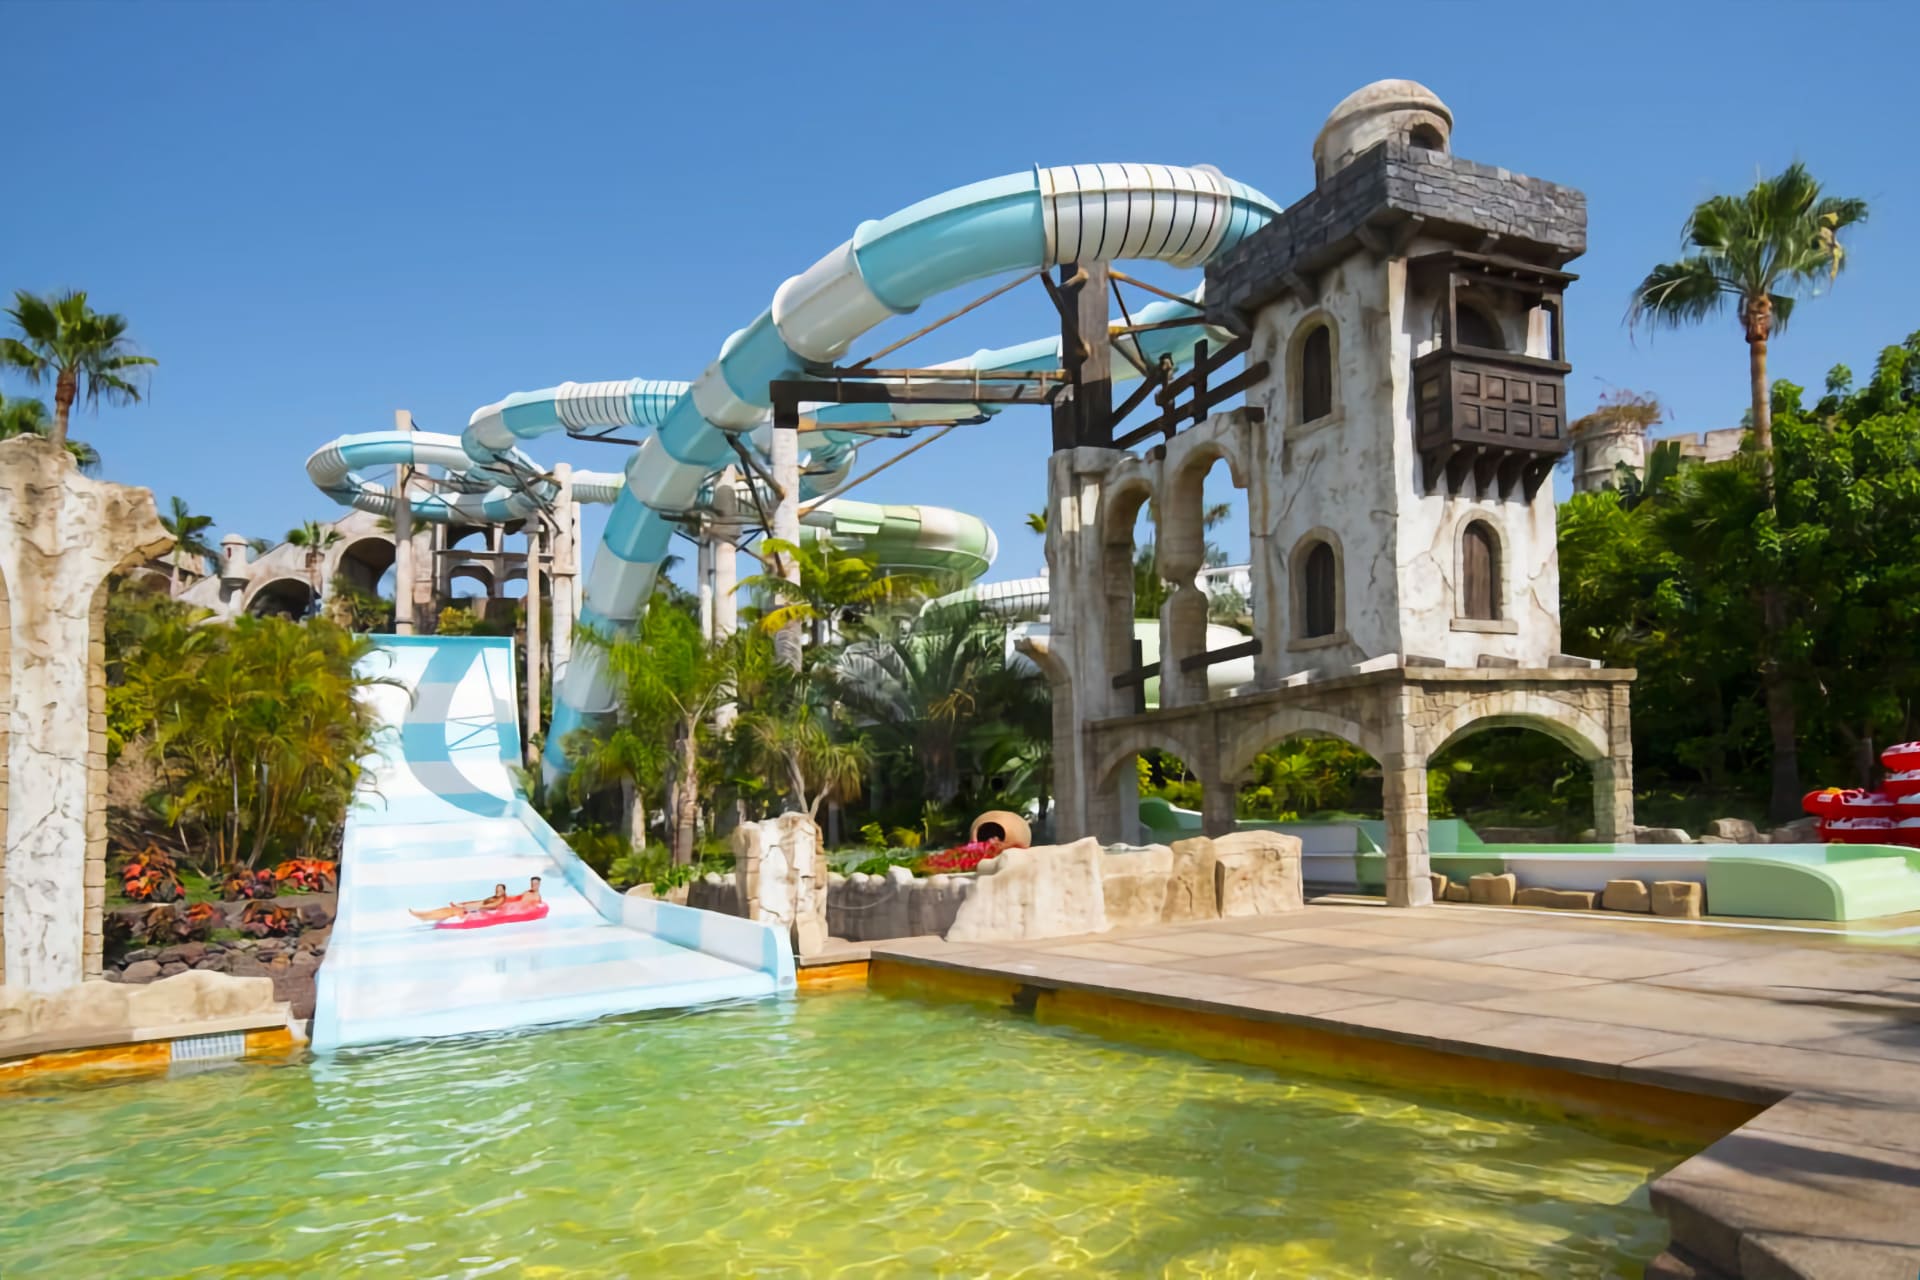 Excited families enjoying the wave pool at Aqualand Costa Adeje, with towering water slides in the background